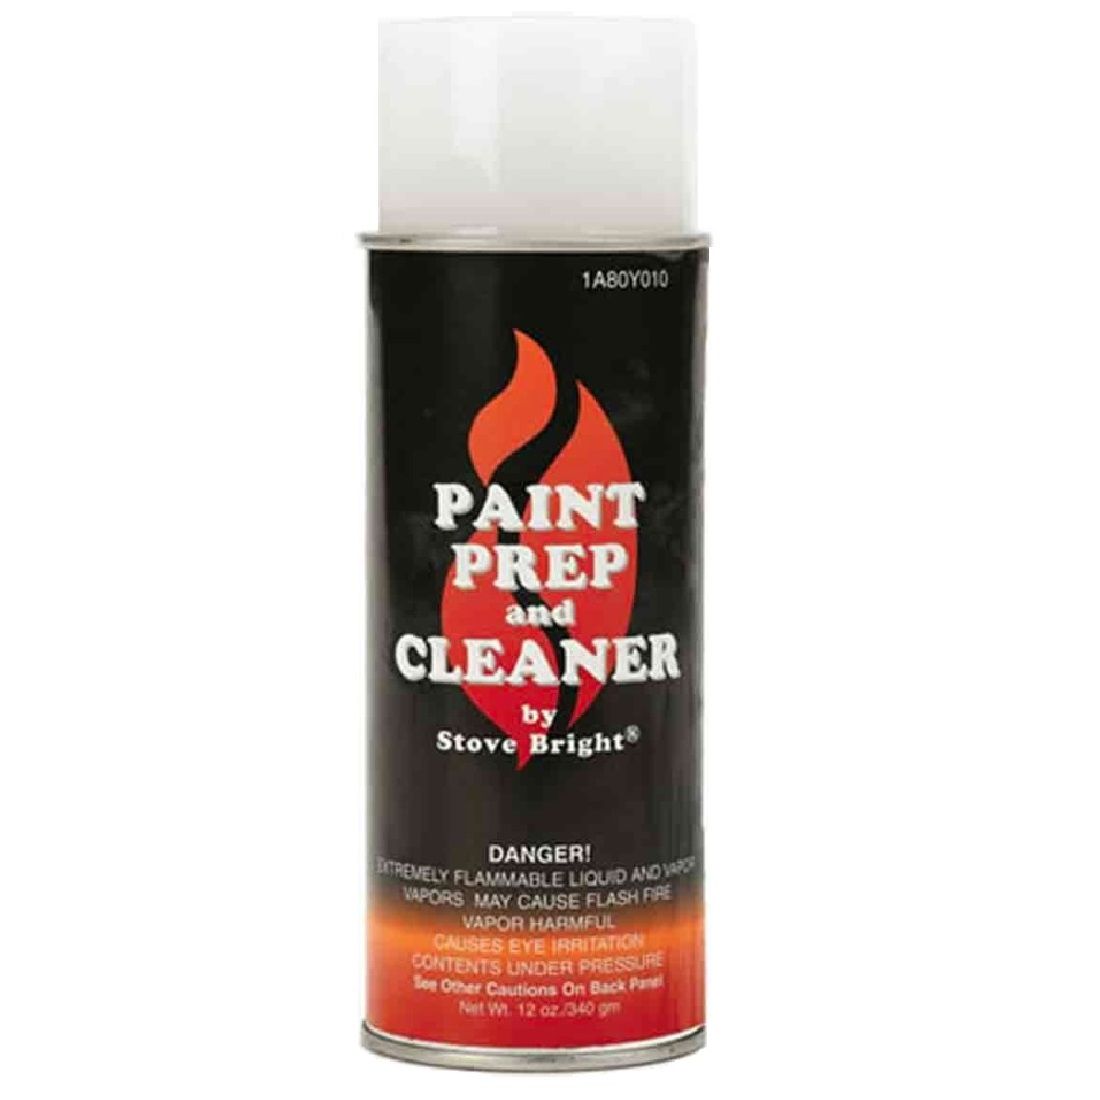 Stove Bright FP1A80Y010 | Paint Prep Cleaner